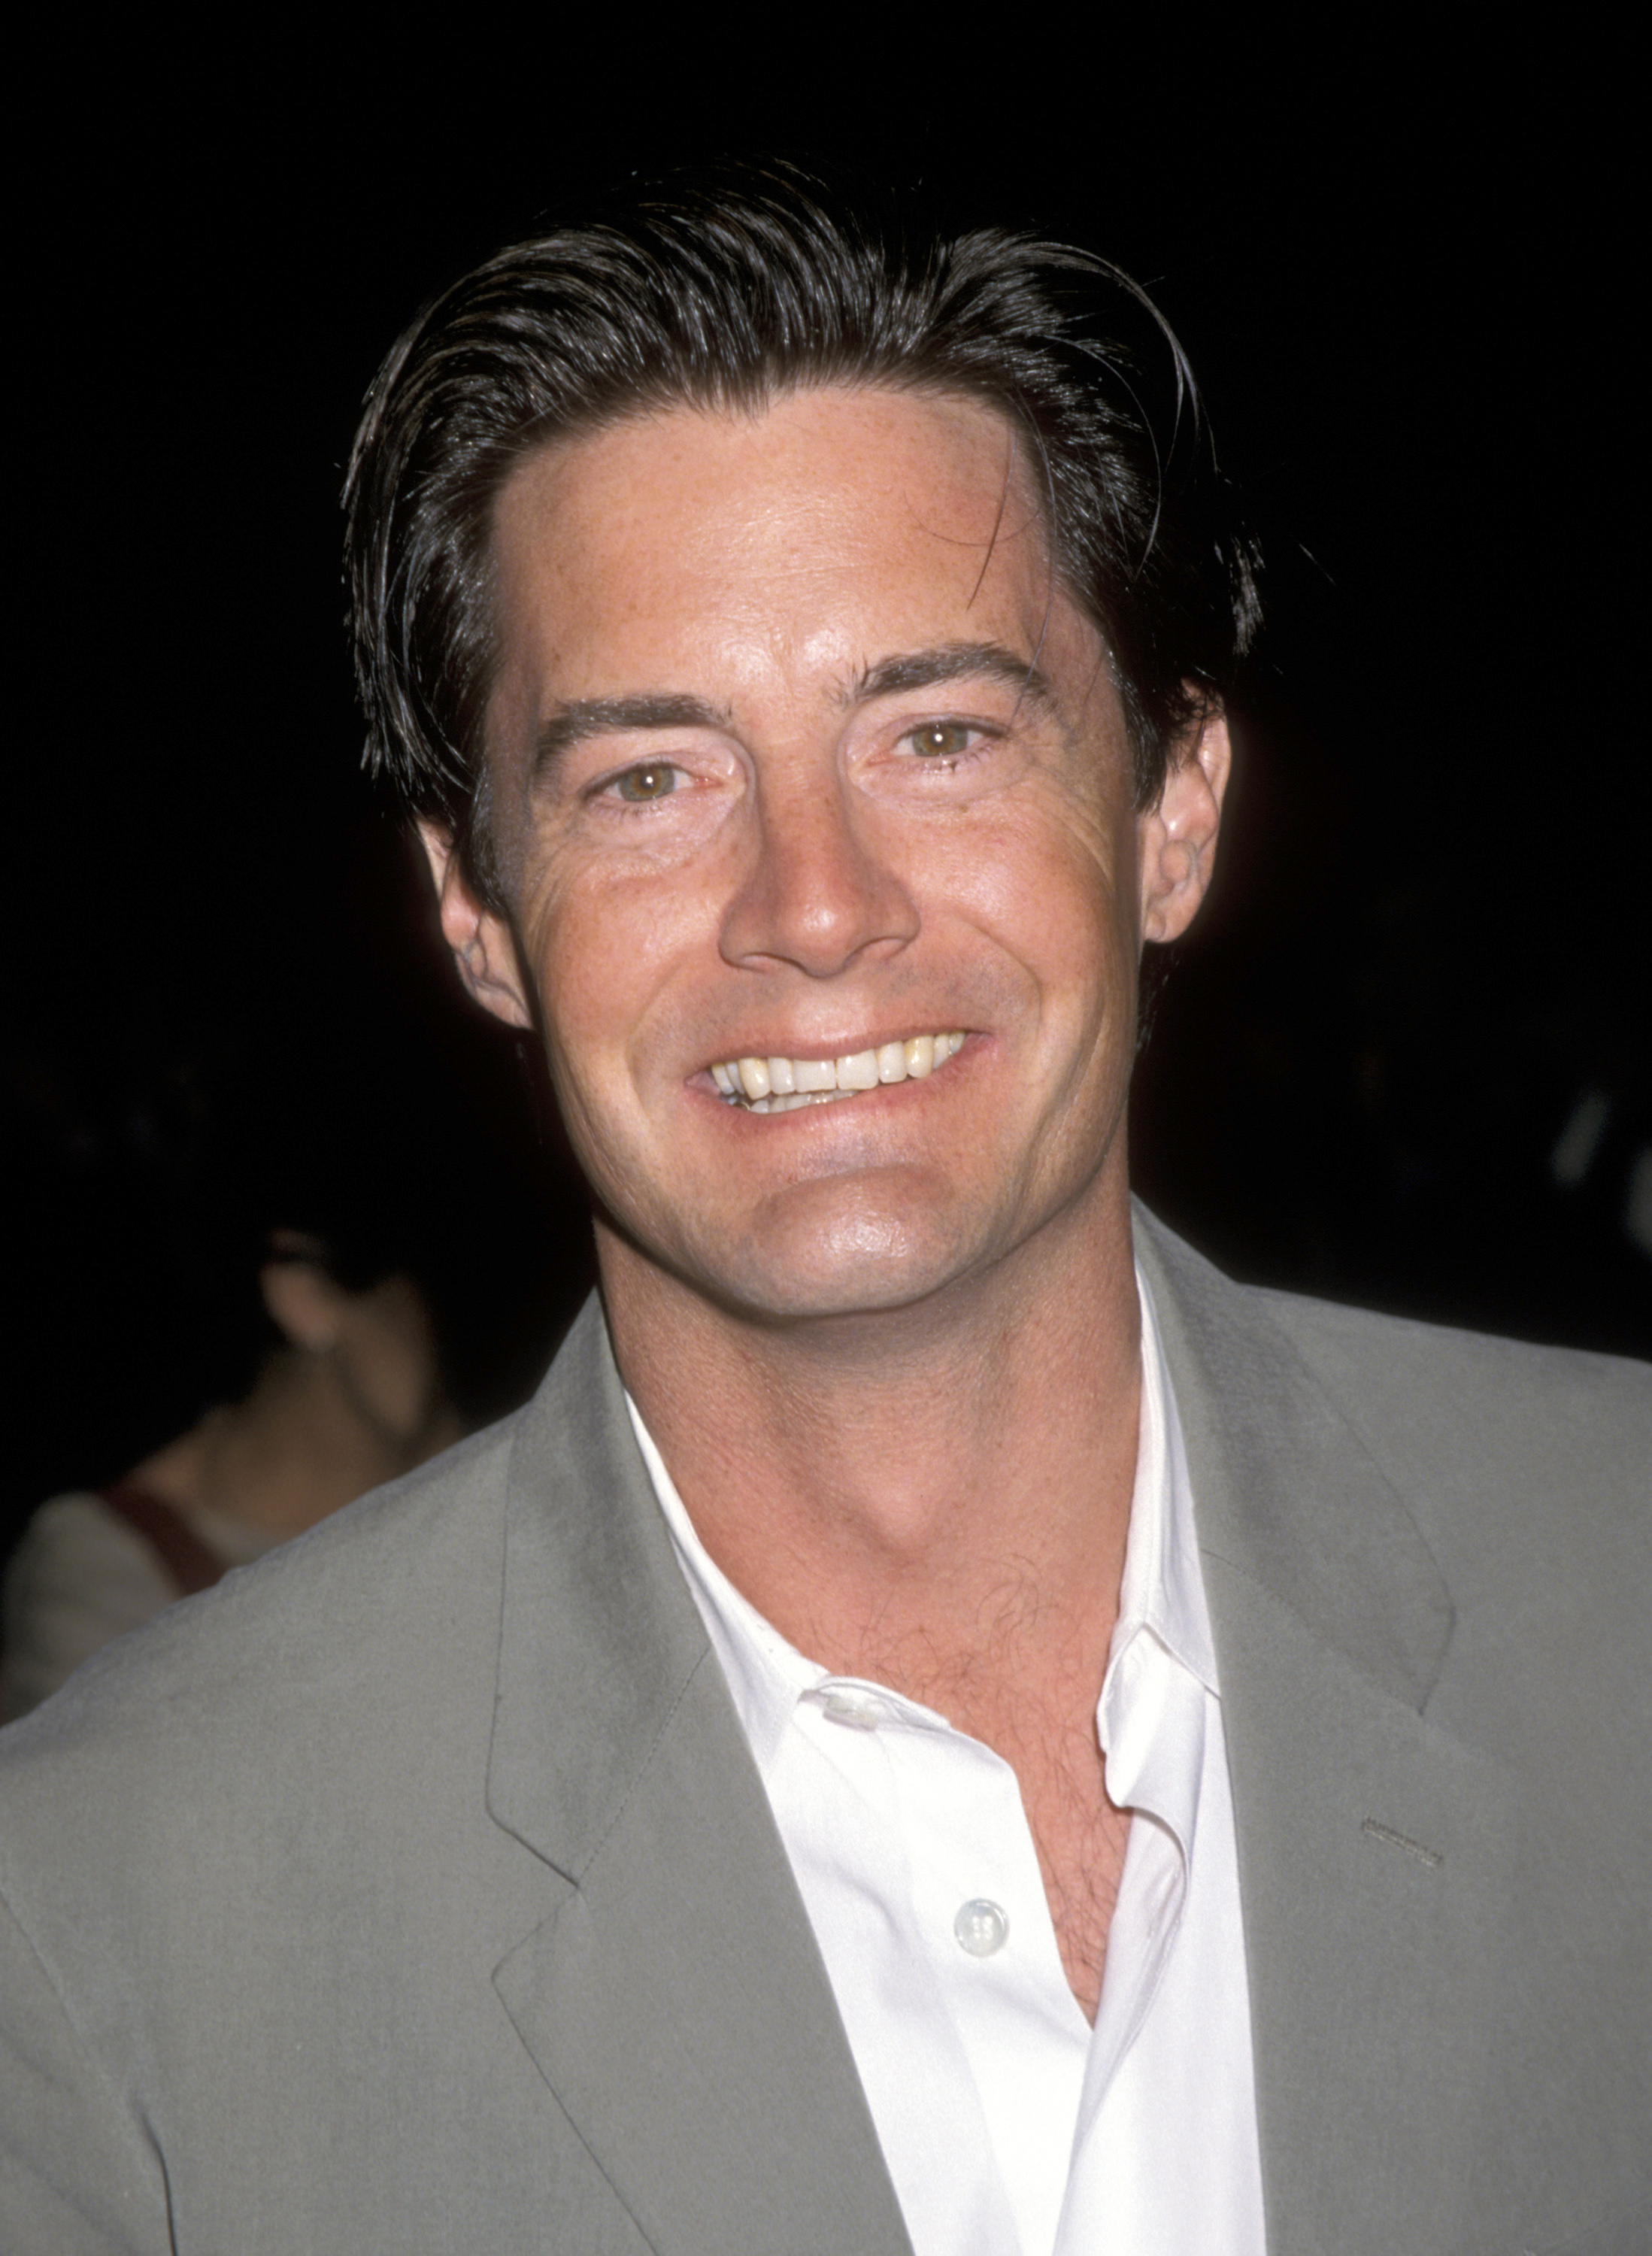 Kyle MacLachlan at the premier of season 3 of "Sex and the City." | Source: Getty Images